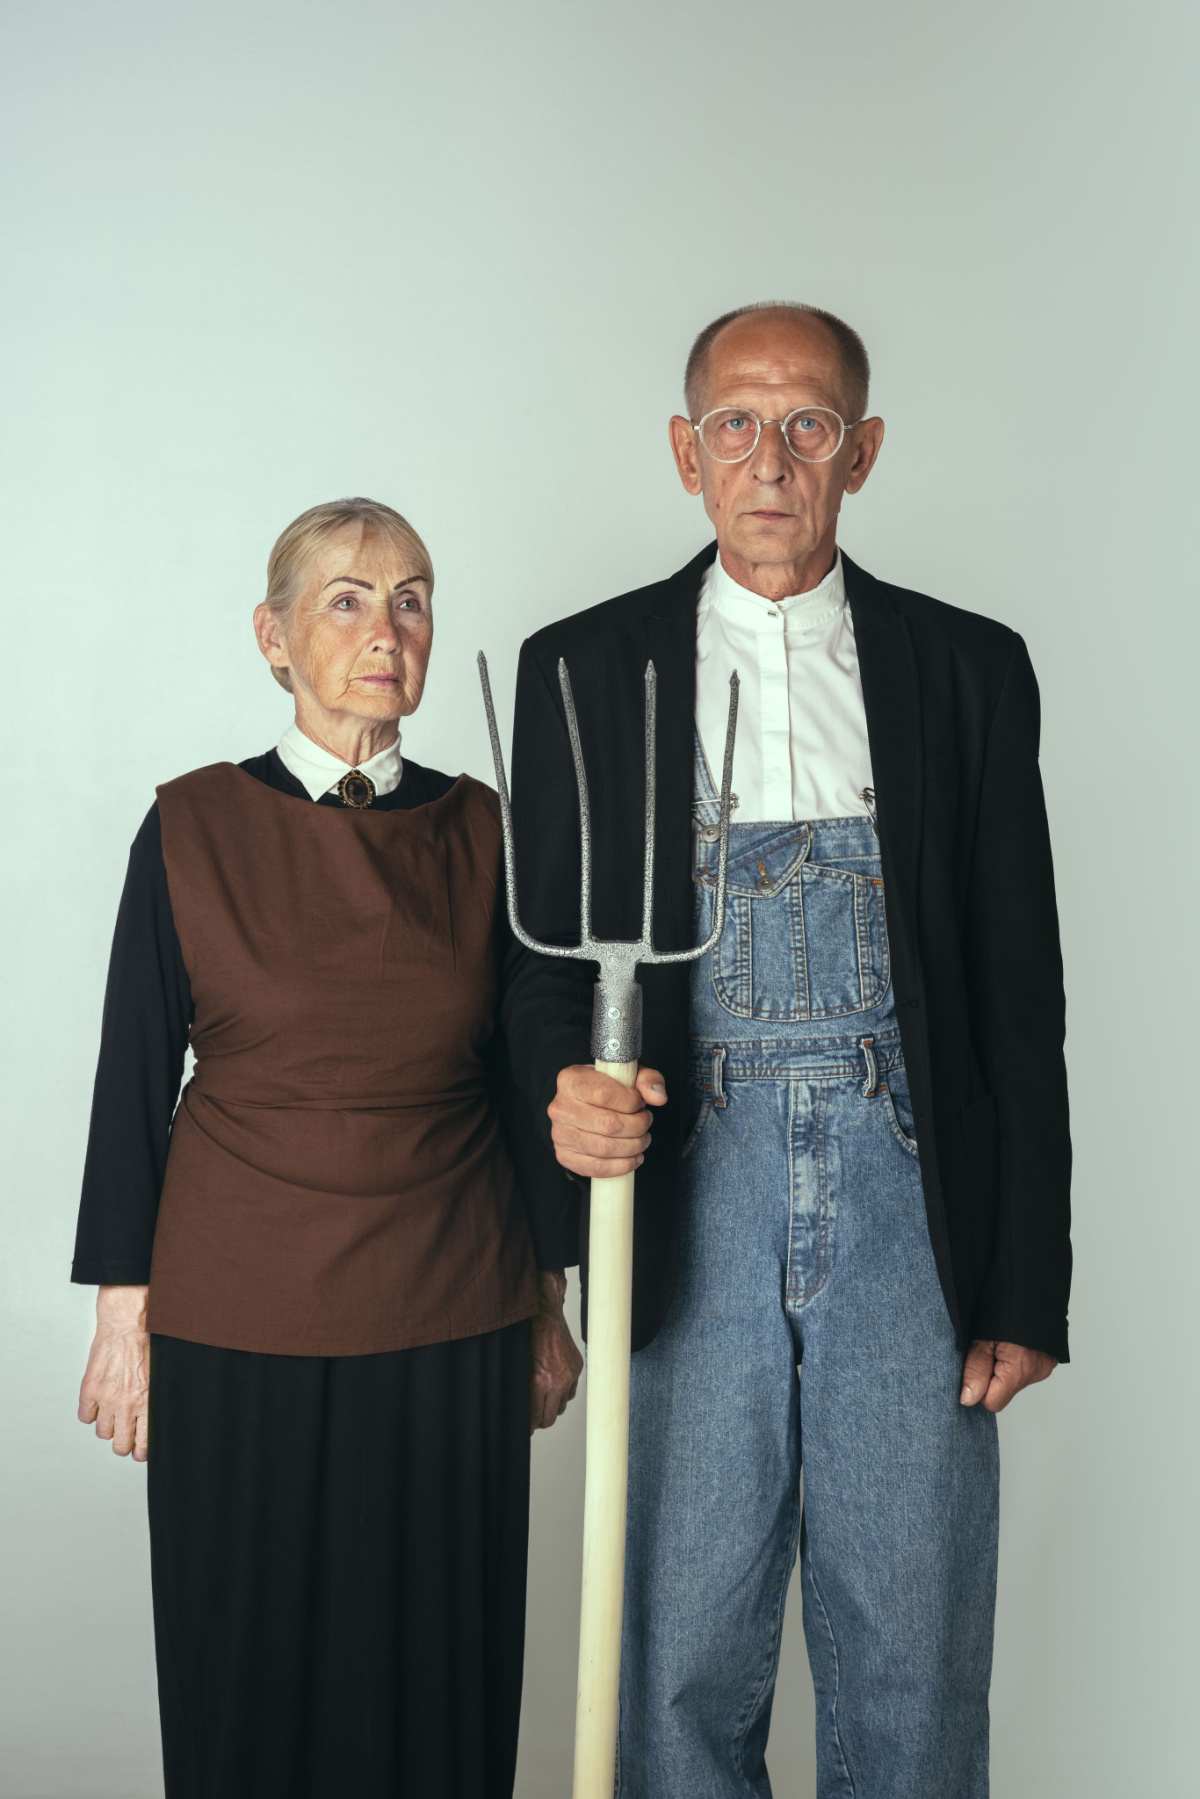 An American Gothic costume idea, where the woman is wearing a black dress, with brown vest, and the man is wearing overalls, a white shirt, and suit jacket, and he's holding a pitch fork.